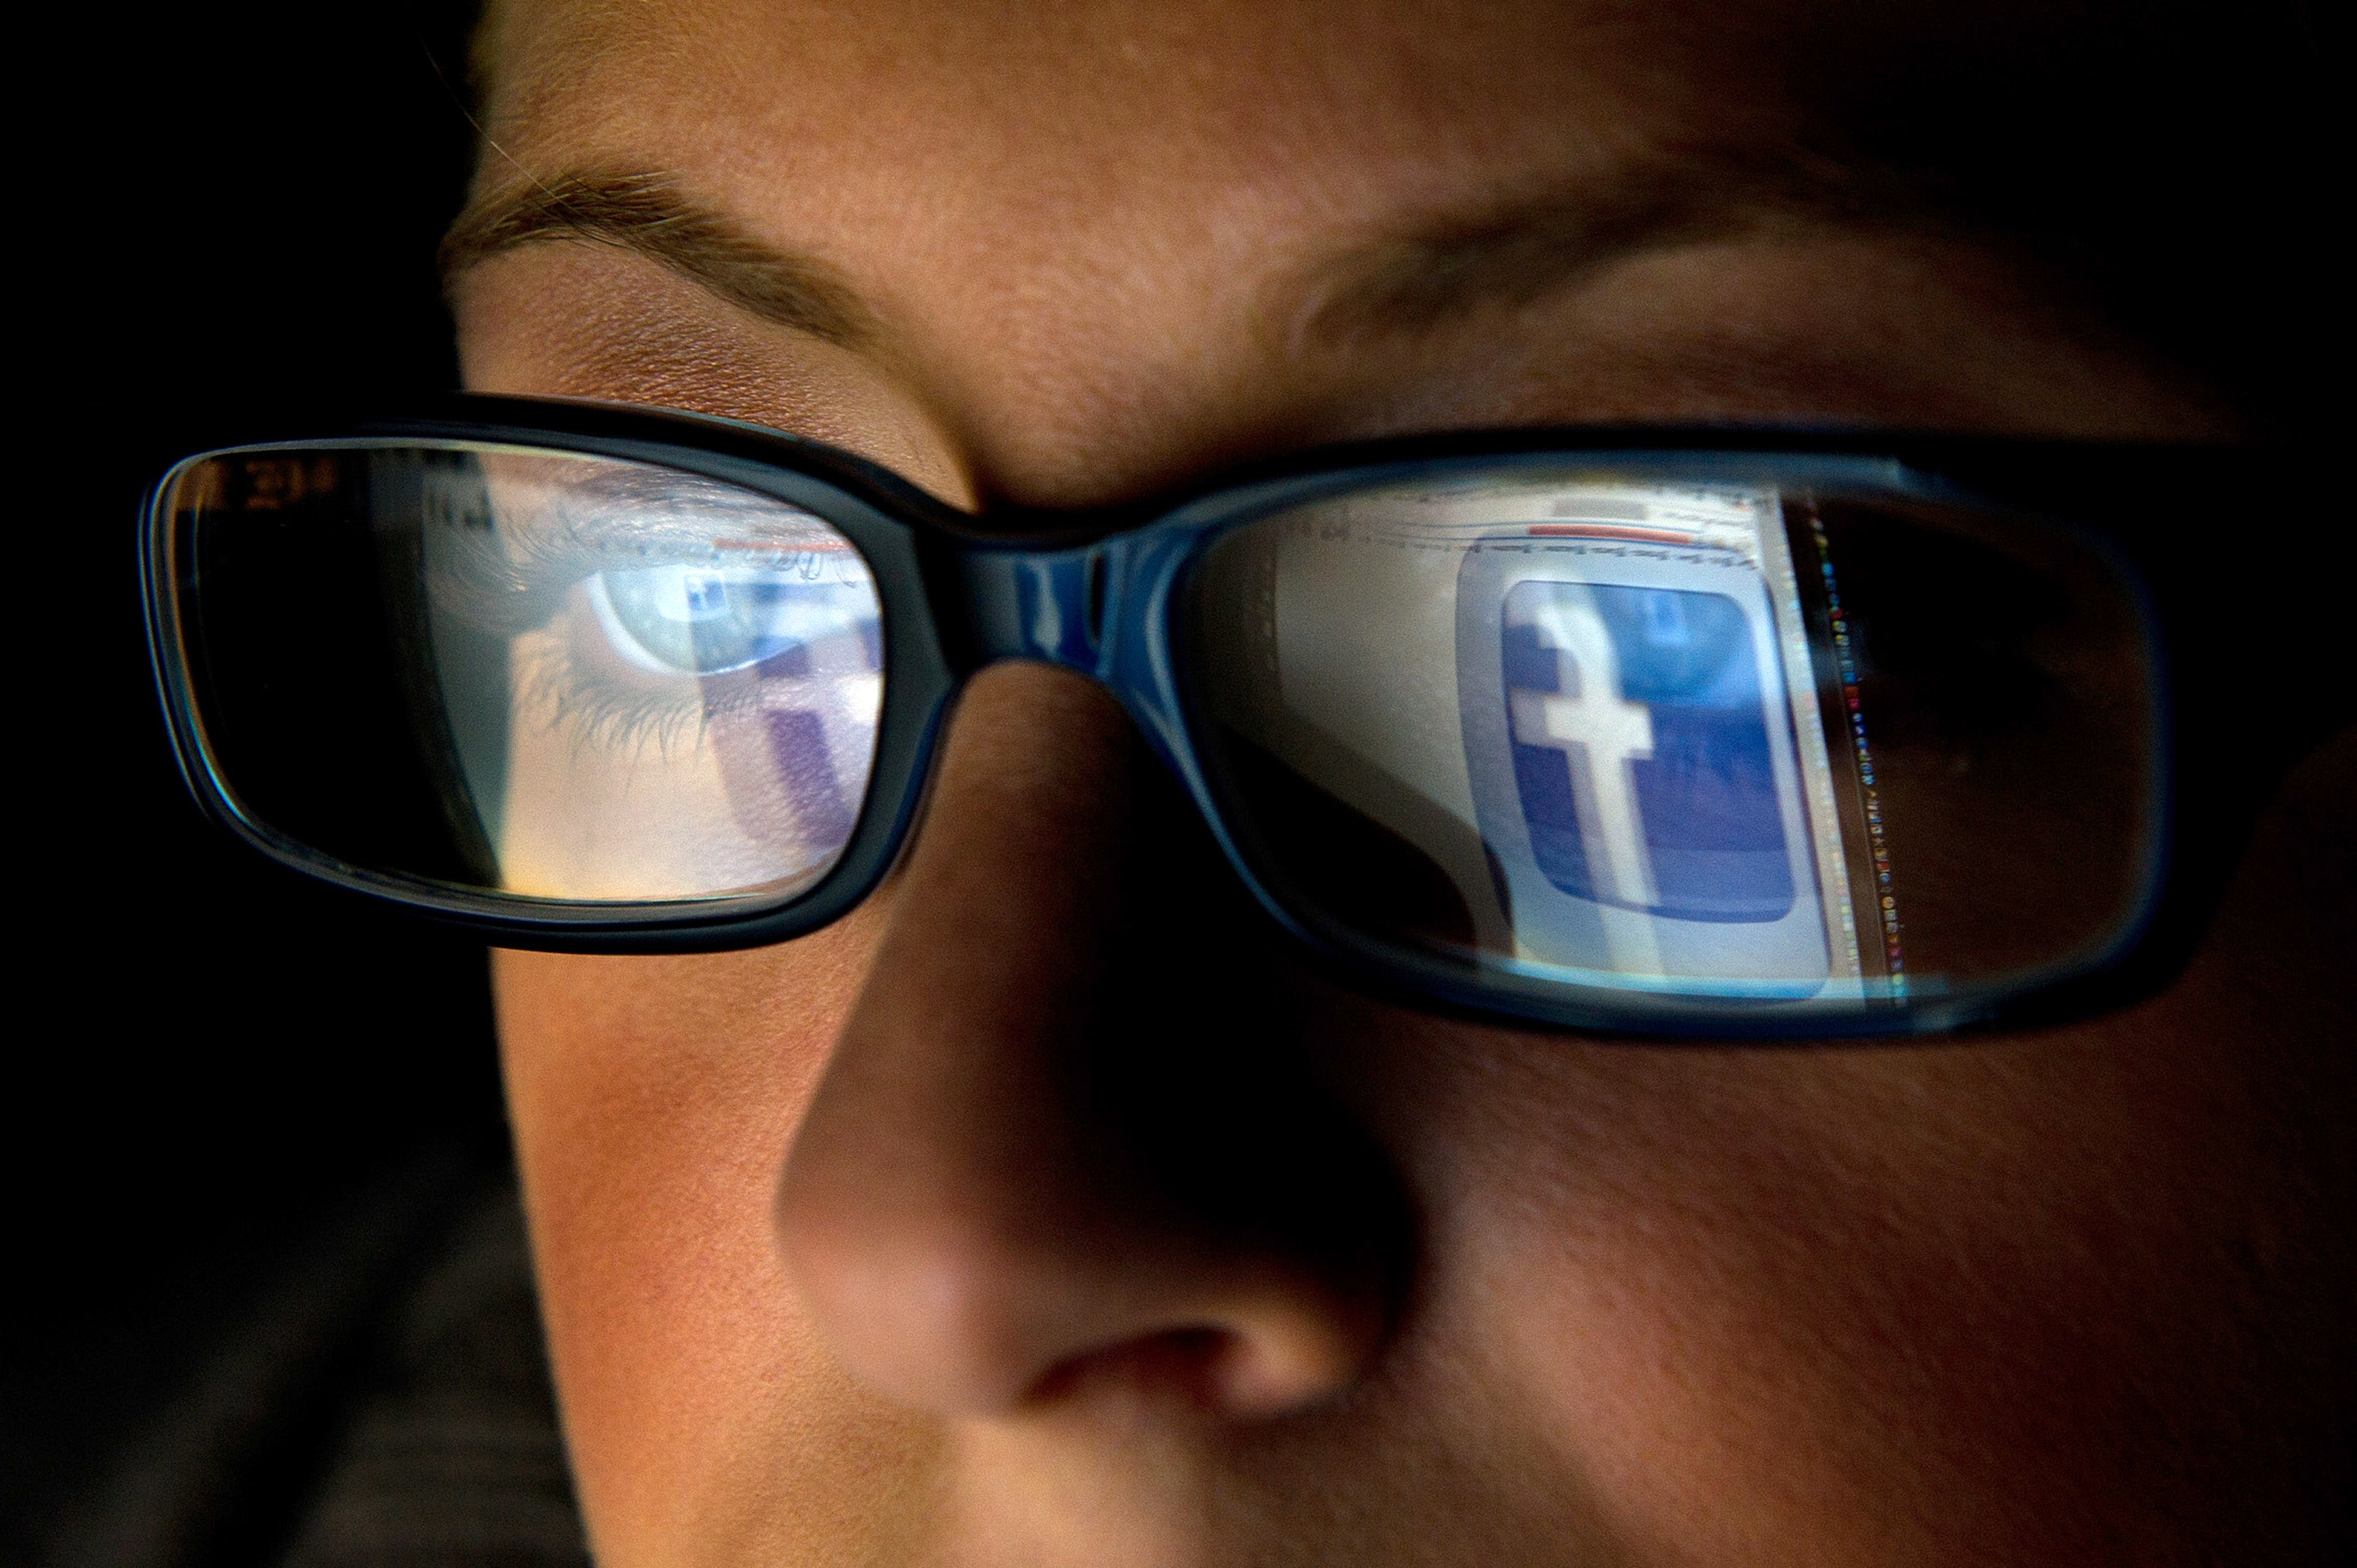 The Facebook logo is reflected in the eyeglasses of a user in San Francisco on Dec. 7, 2011. (Bloomberg/Getty Images)